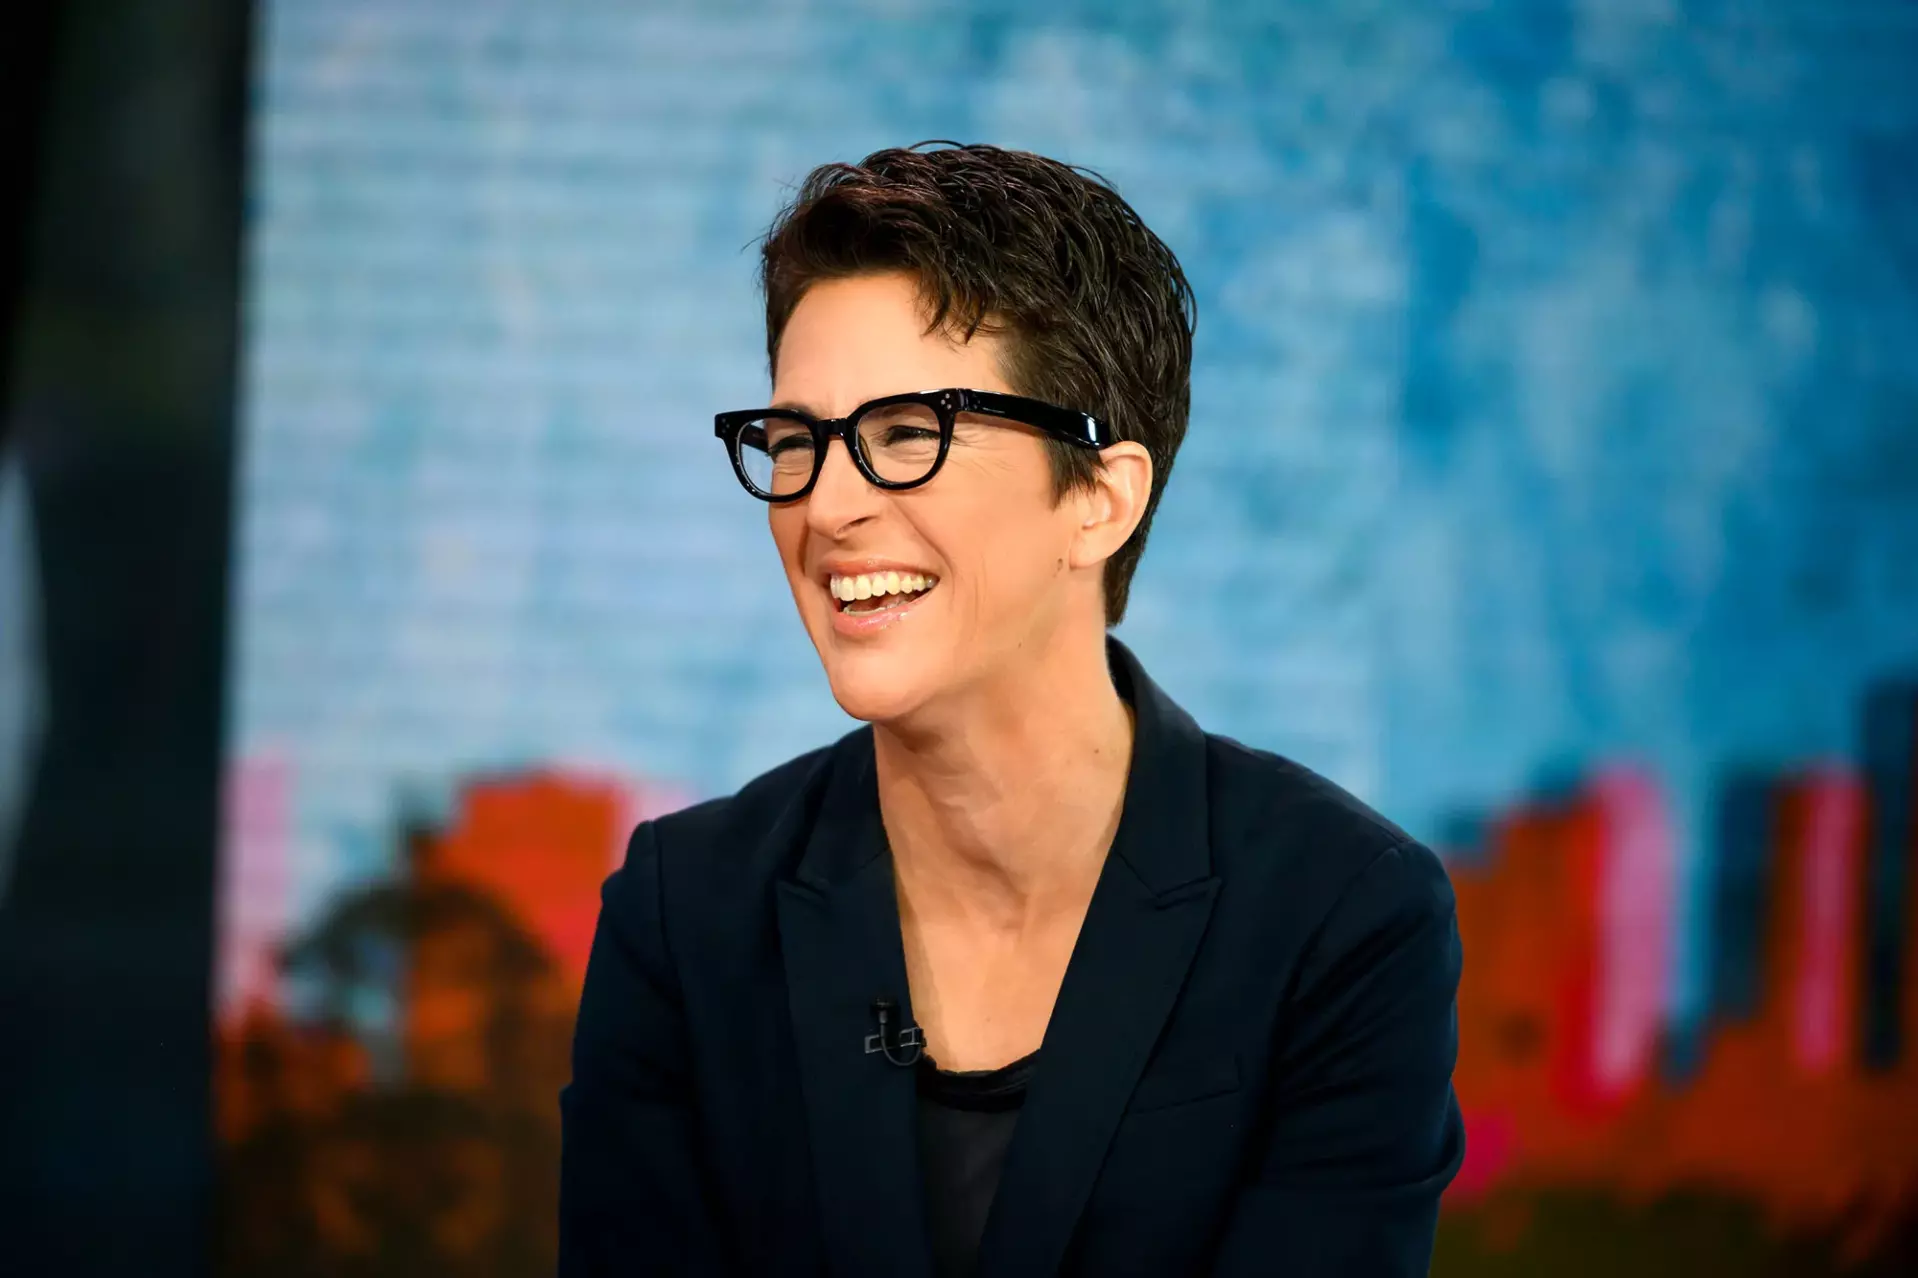 Rachel Maddow's career as a podcaster